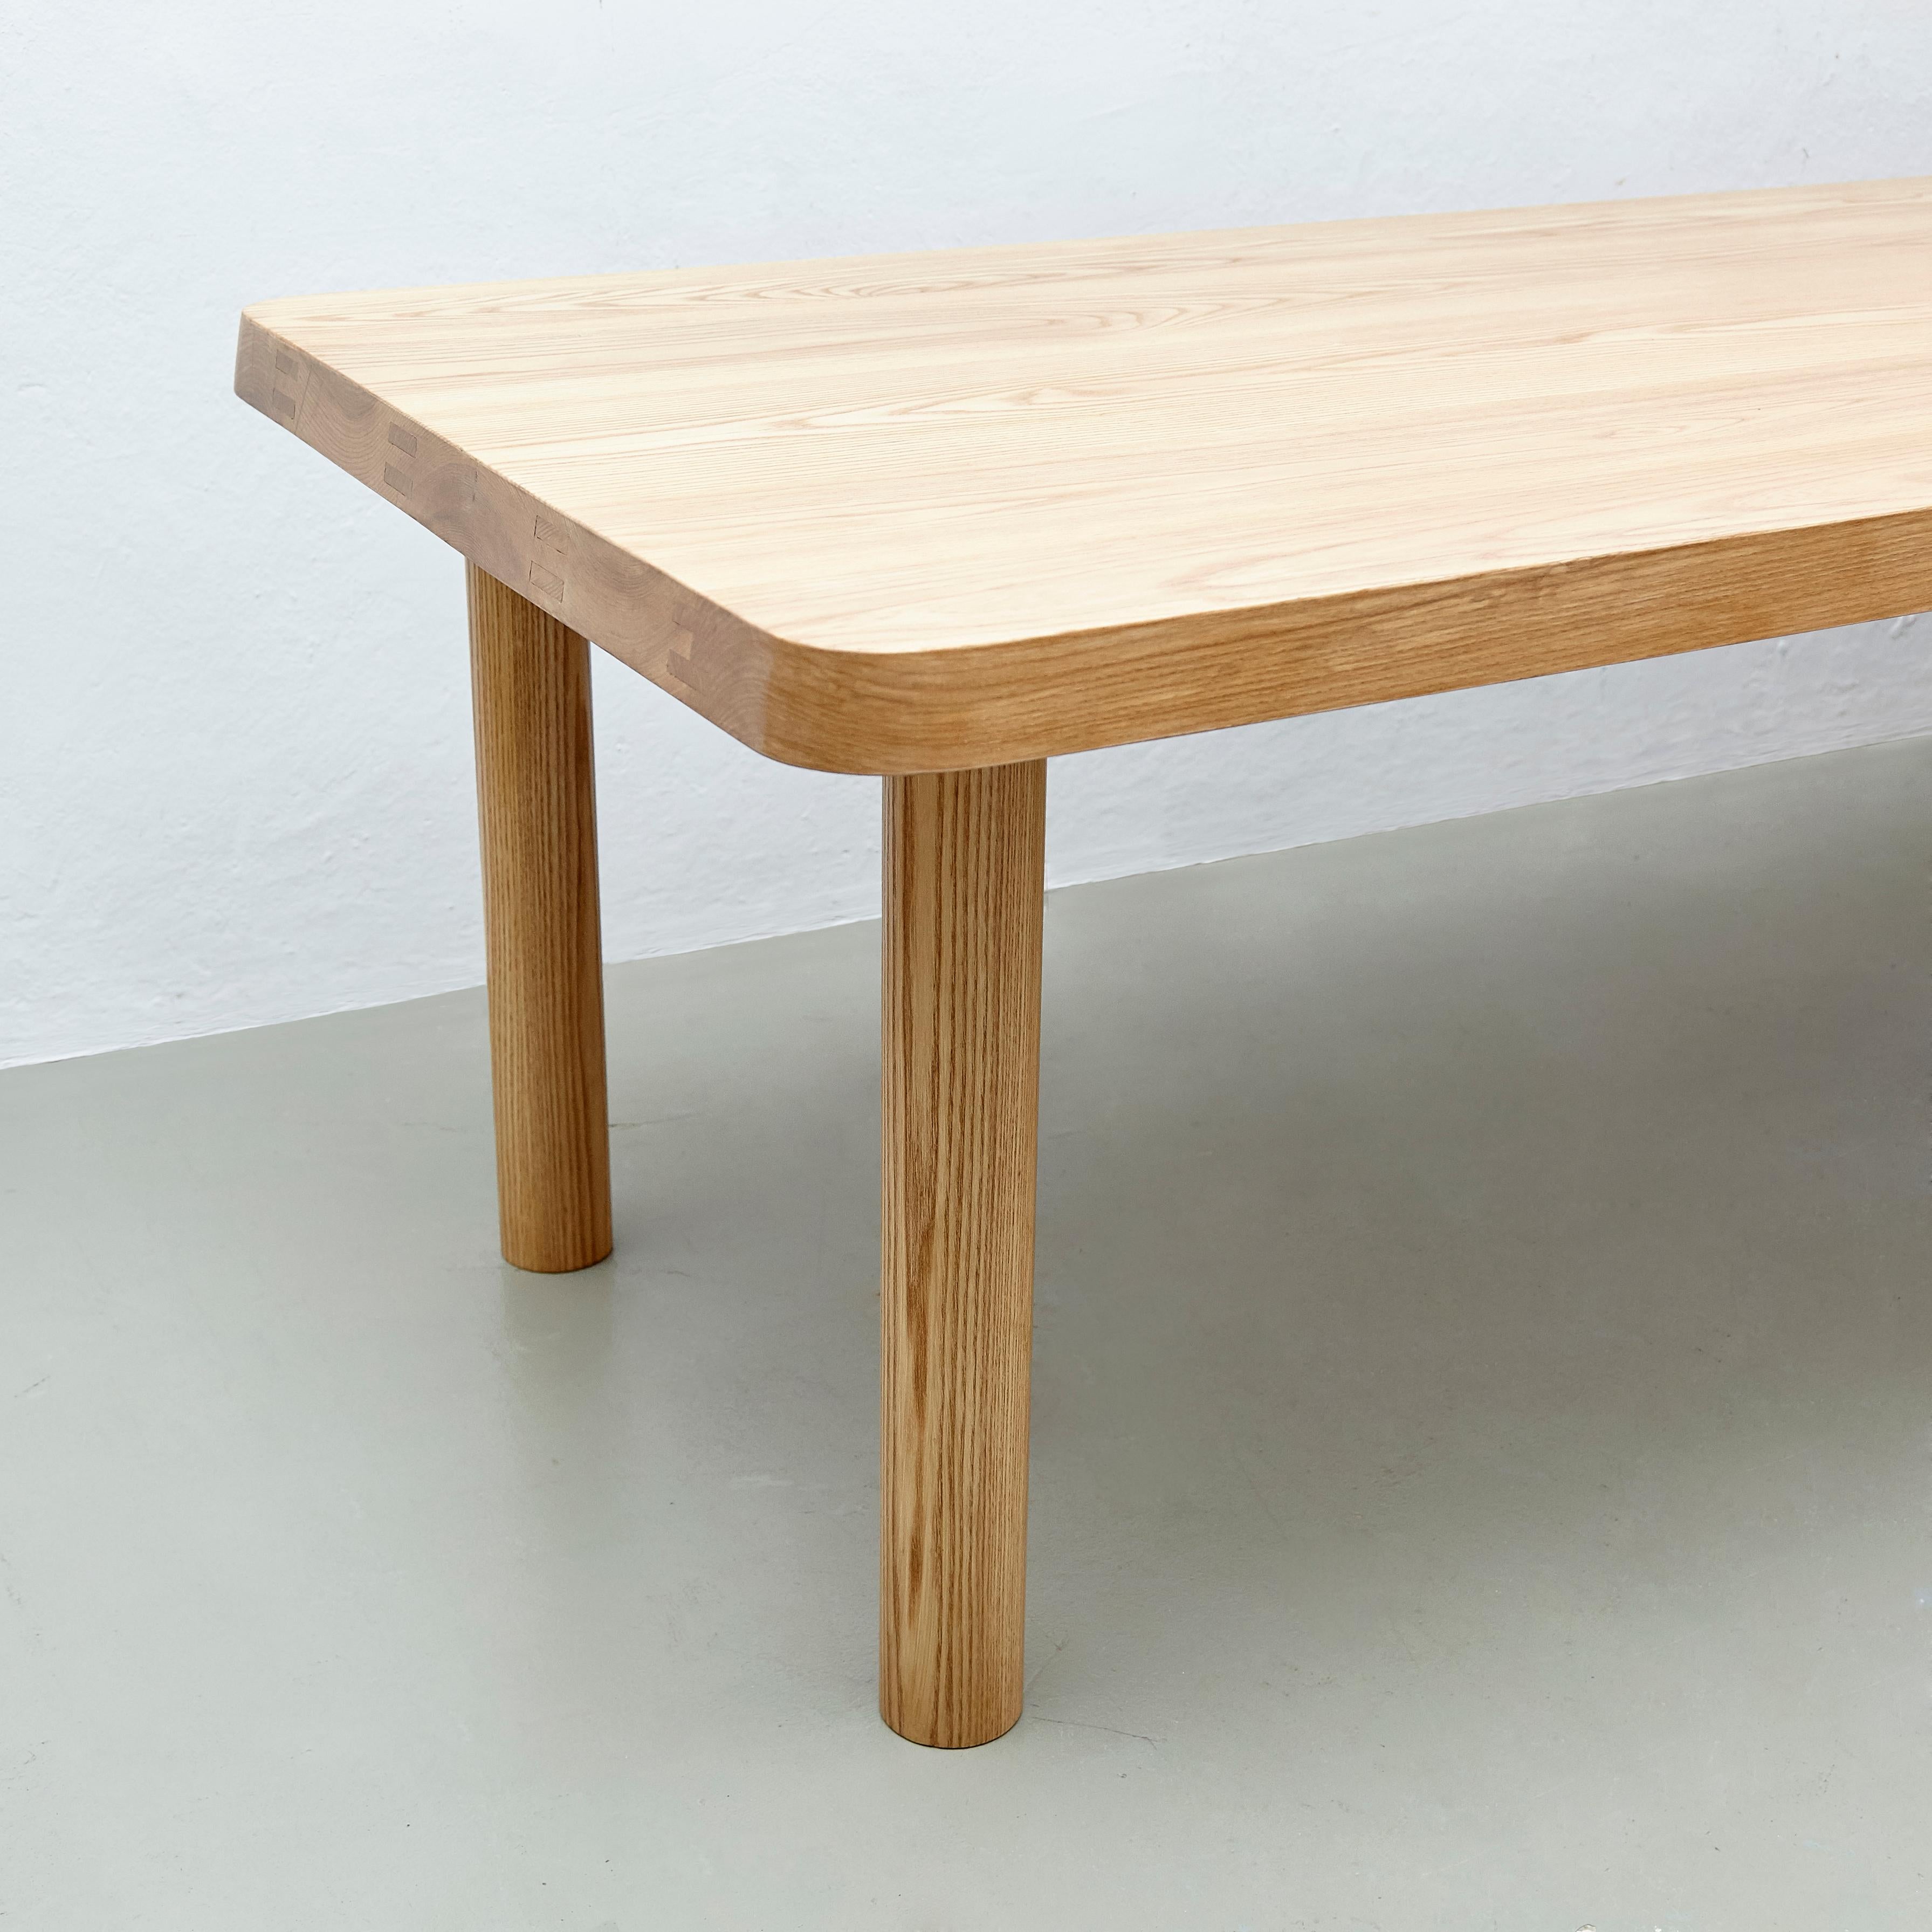 Dada Est. Contemporary Solid Ash Extra Large Dining Table In Good Condition For Sale In Barcelona, Barcelona